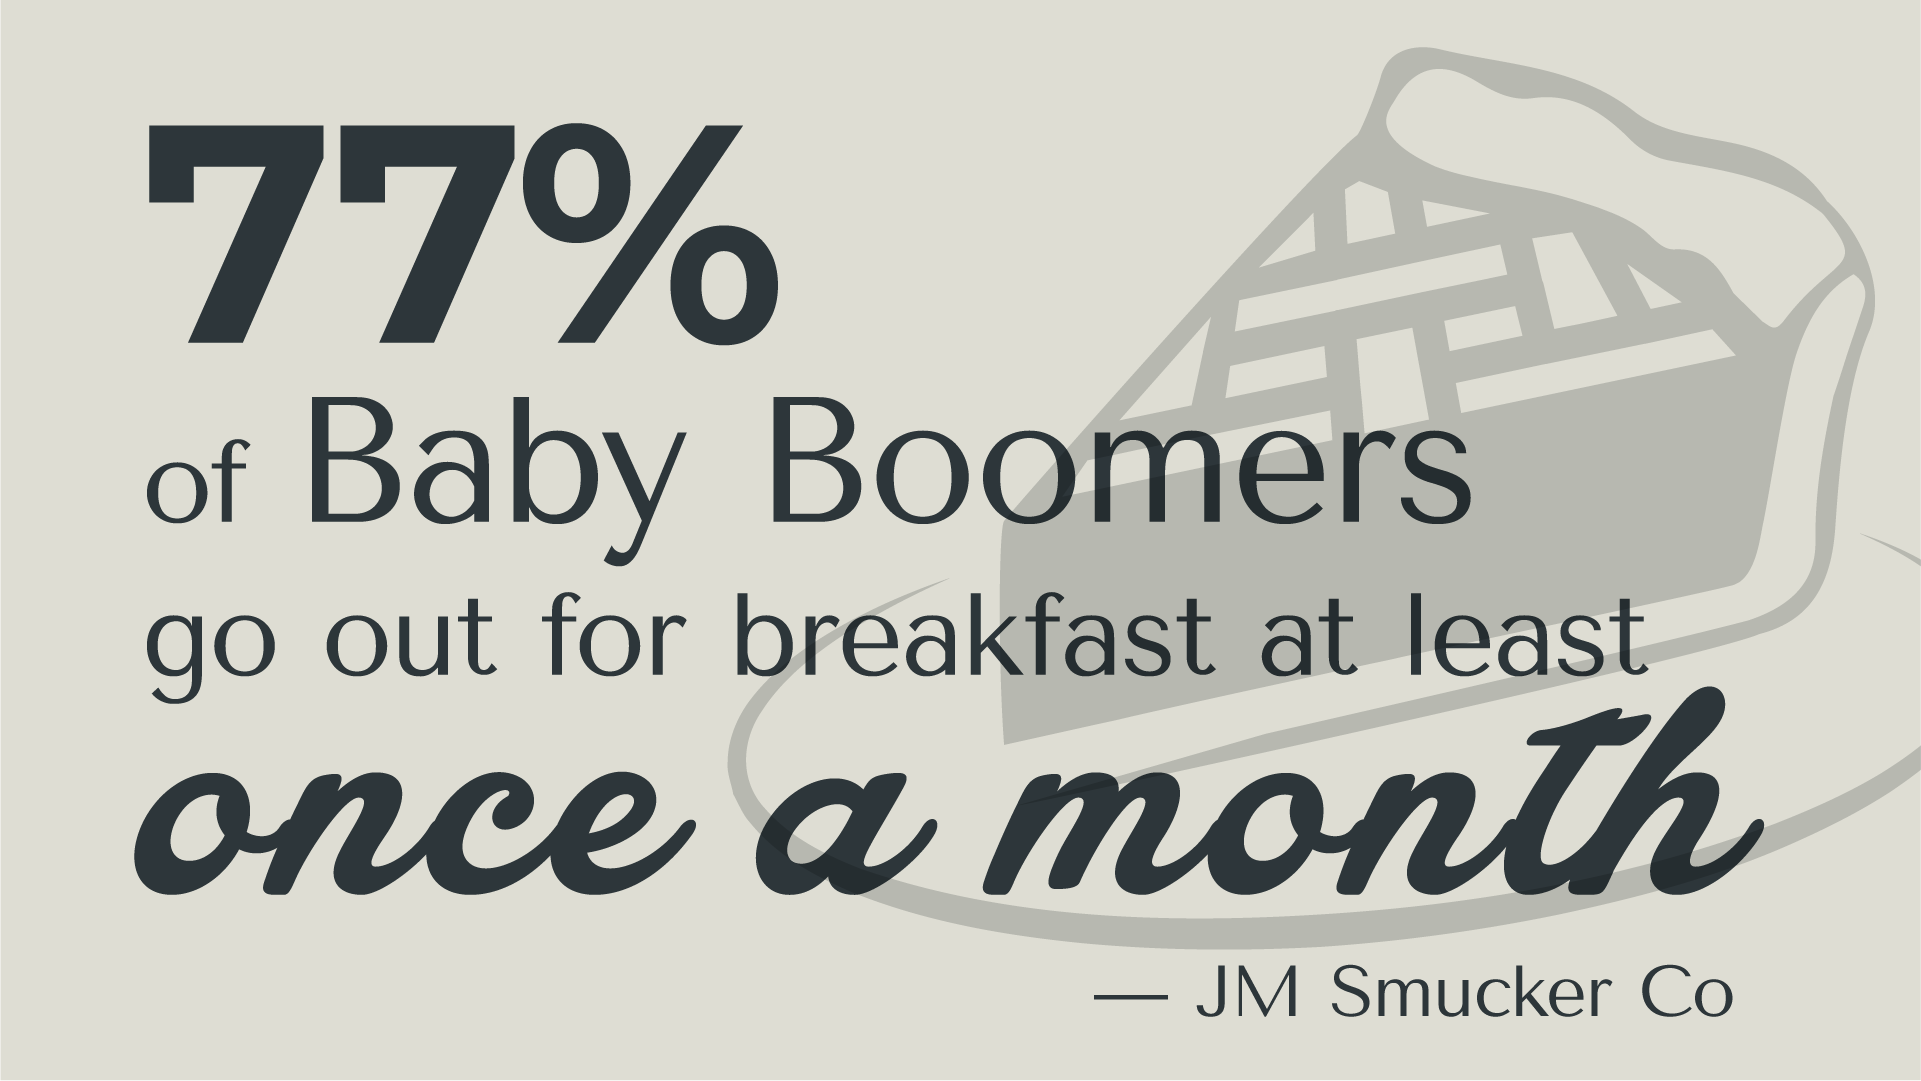 77% of baby boomers go out for breakfast franchise at least once a month